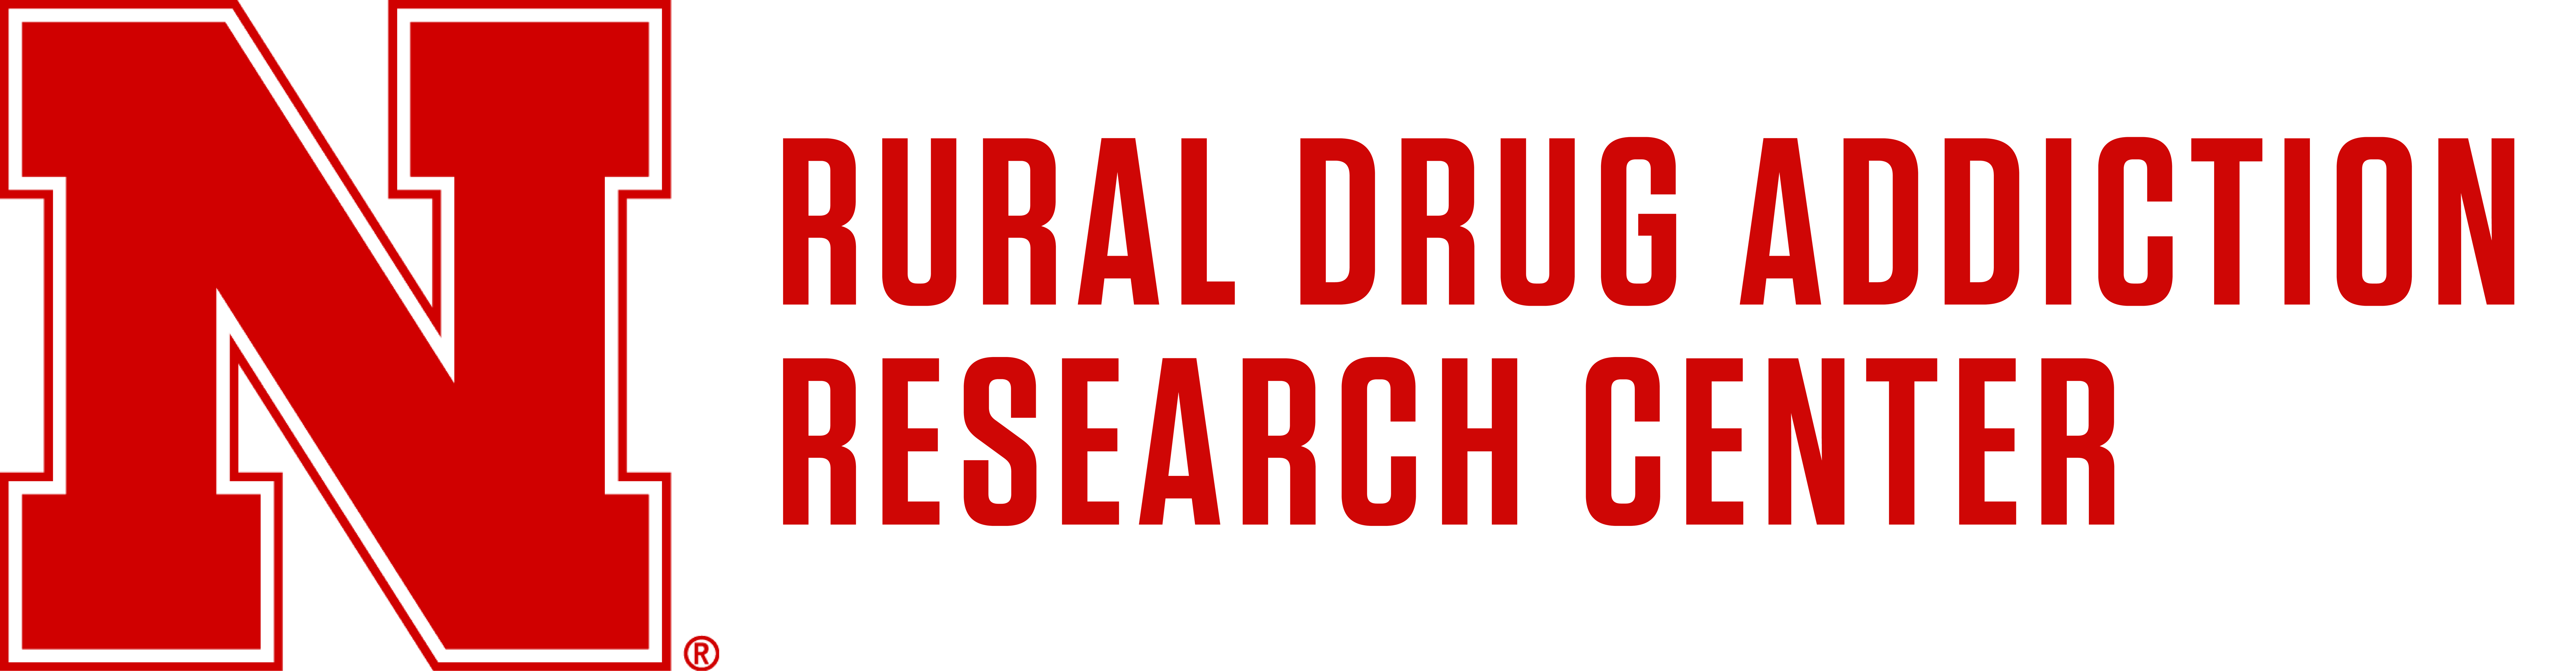 The University of Nebraska Logo, a large, red block letter "N." To the right in capital red block letters, the words "RURAL DRUG ADDICTION RESEACH CENTER"